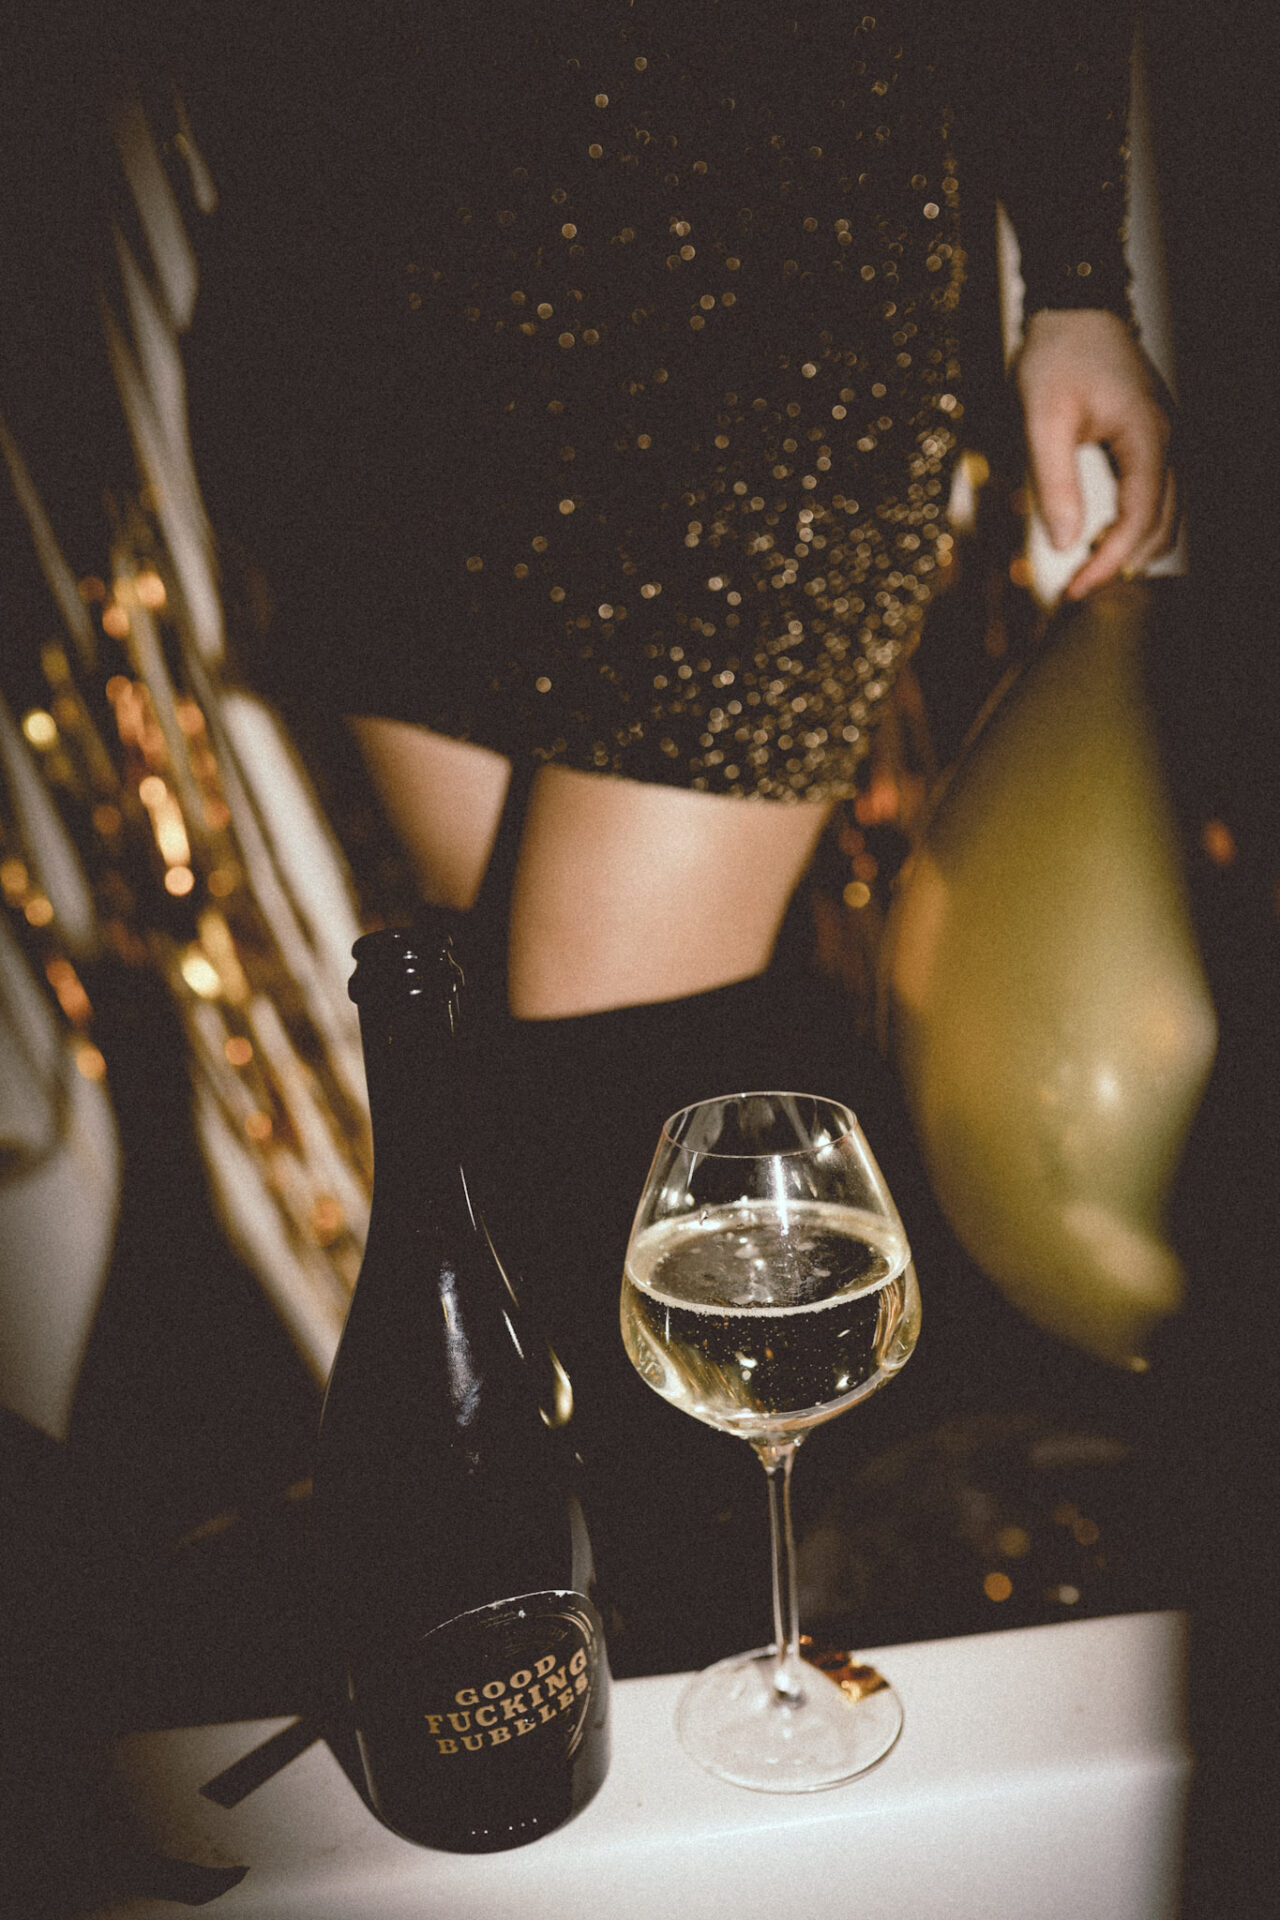 Prosecco vs Champagne - woman's legs with a glass of sparkling wine and bottle of "good bubbles"